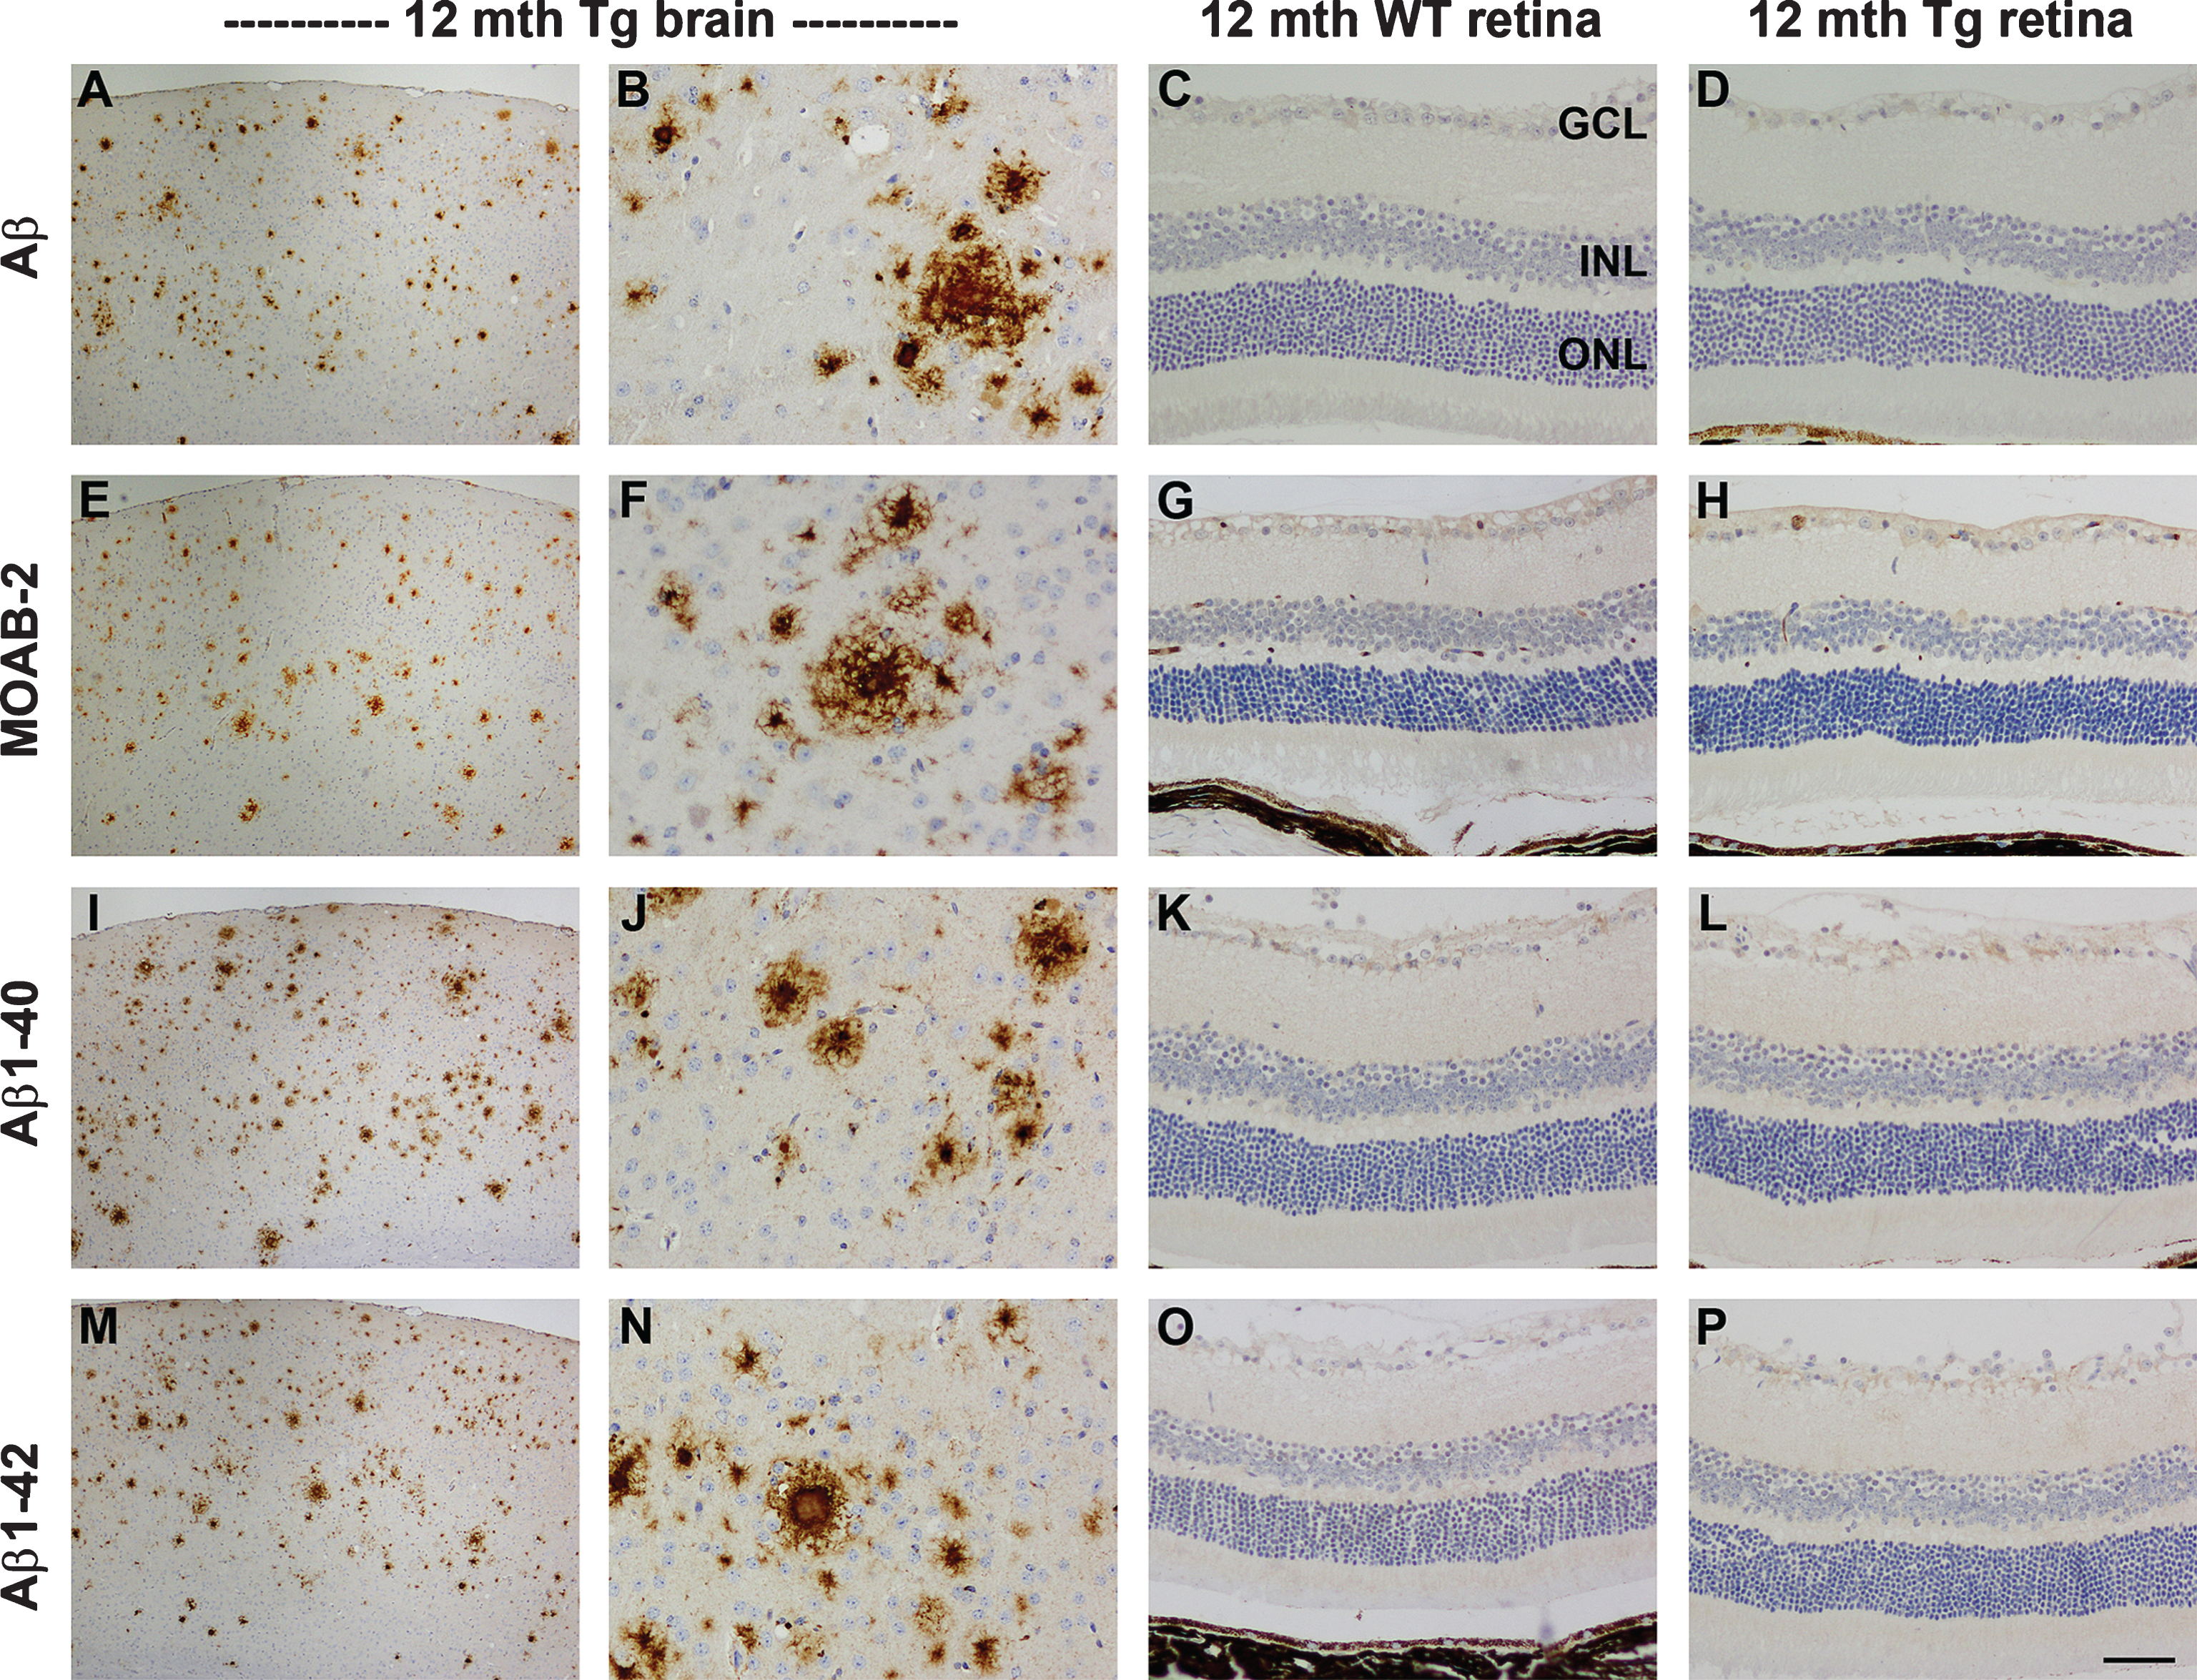 Representative images of Aβ, MOAB-2, Aβ1 - 40, and Aβ1 - 42 immunolabeling in the brain and retina of 12-month-old WT and Tg mice. In Tg parietal cortex (A, B, E, F, I, J, M, N) amyloid plaques are abundant. All four antibodies display high signal-to-noise ratios. In contrast, no amyloid deposits are evident in sections of WT (C, G, K, O) or Tg (D, H, L, P) retinas. Scale bar: A, E, I, M = 250 μm; B-D, F-H, J-L, N-P = 50 μm; GCL, ganglion cell layer; INL, inner nuclear layer; ONL, outer nuclear layer.